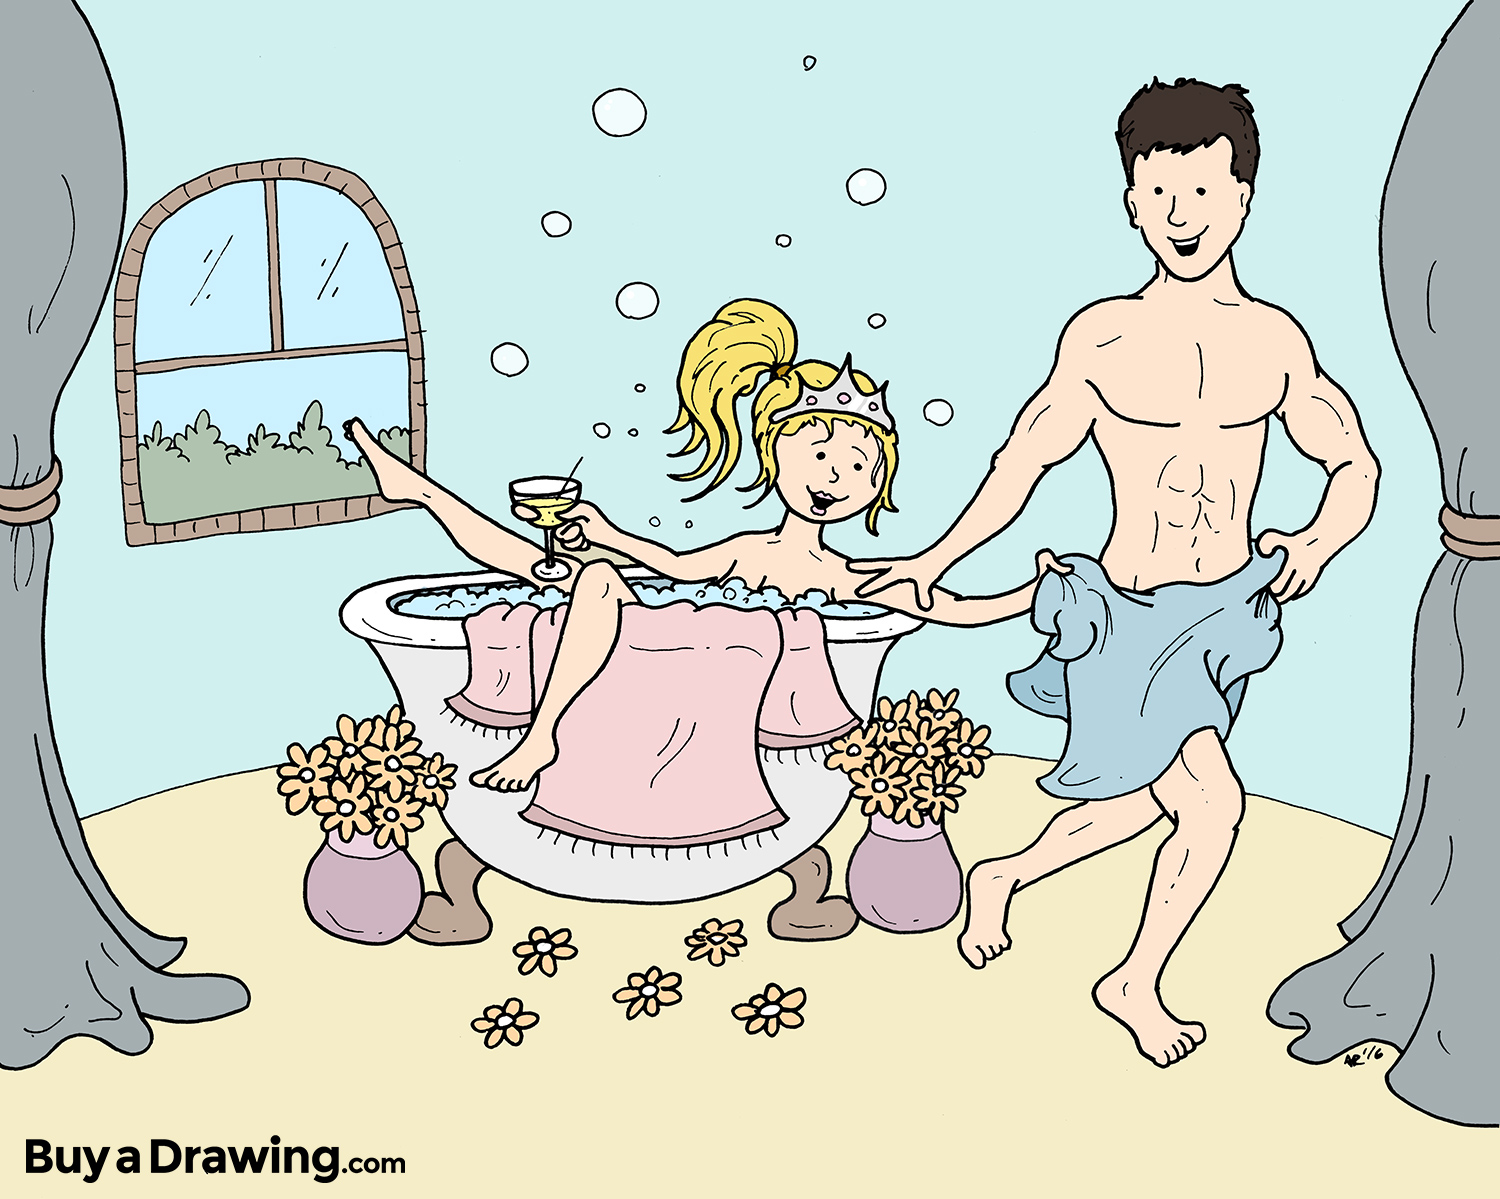 Cartoon Drawing of Playful Couple for a Bathroom Decoration